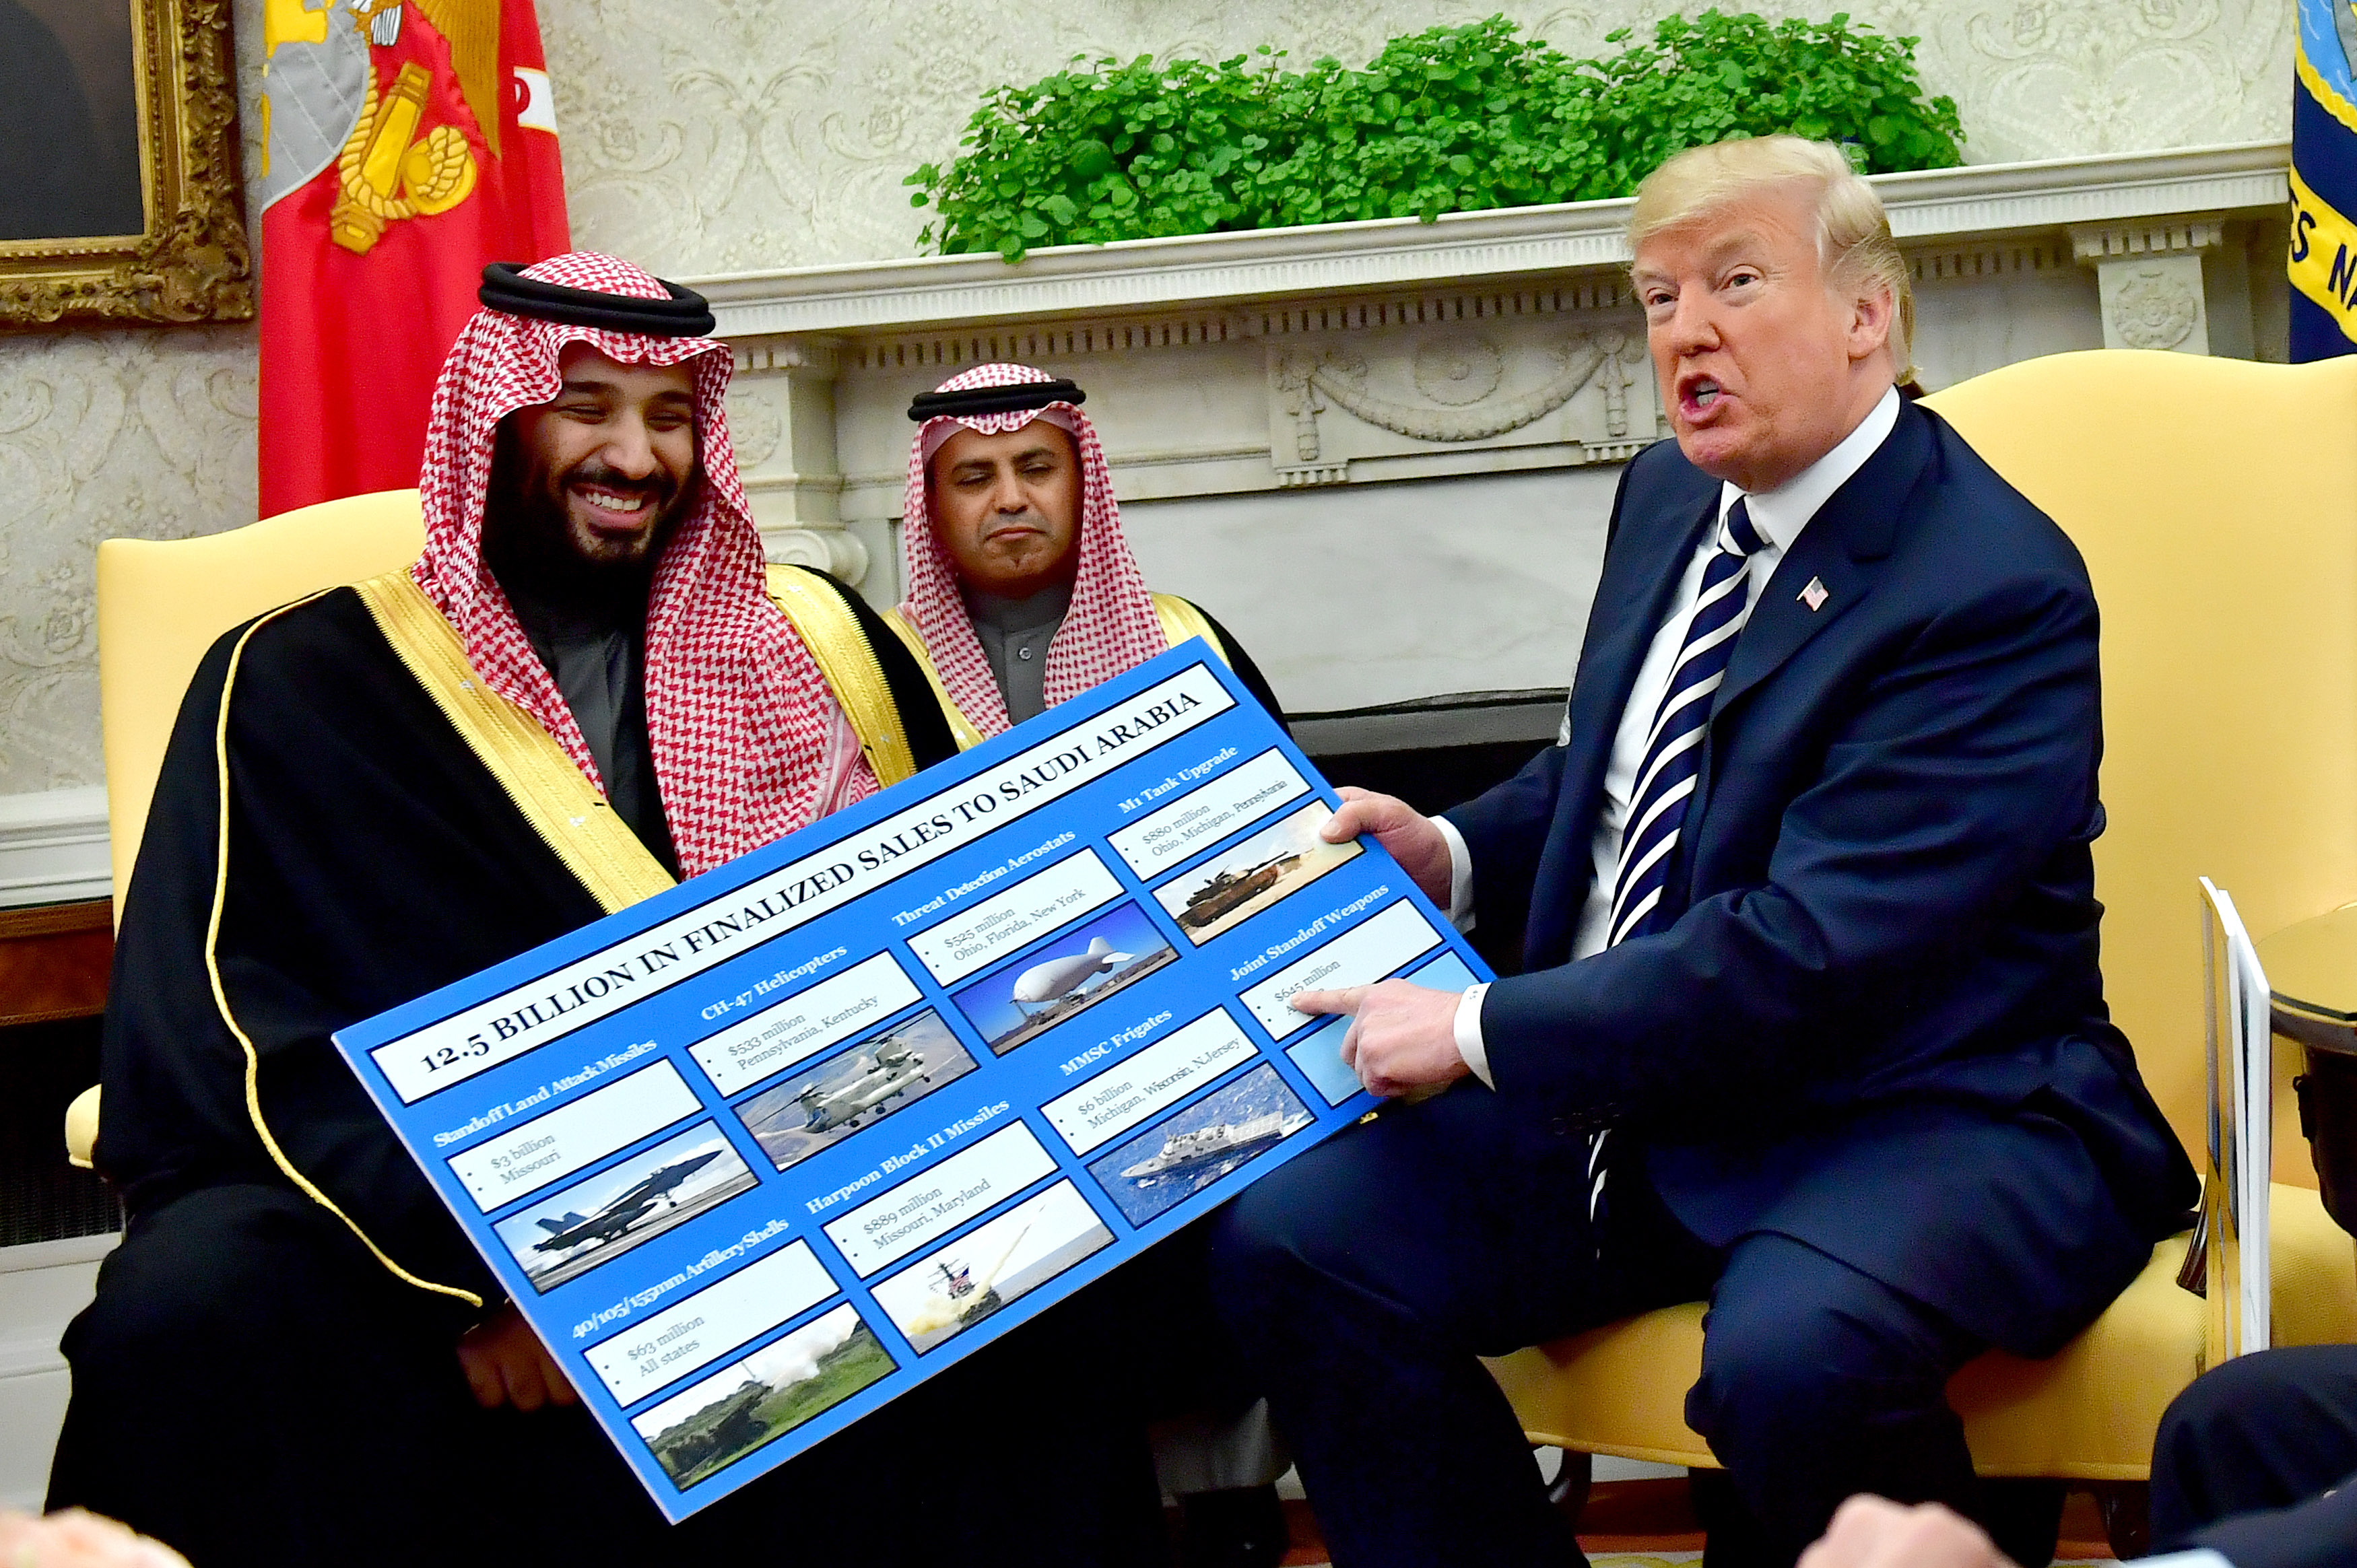 President Donald Trump (R) holds up a chart of military hardware sales as he meets with Crown Prince Mohammed bin Salman of the Kingdom of Saudi Arabia in the Oval Office at the White House on March 20, 2018 in Washington, D.C. (Photo by Kevin Dietsch-Pool/Getty Images)